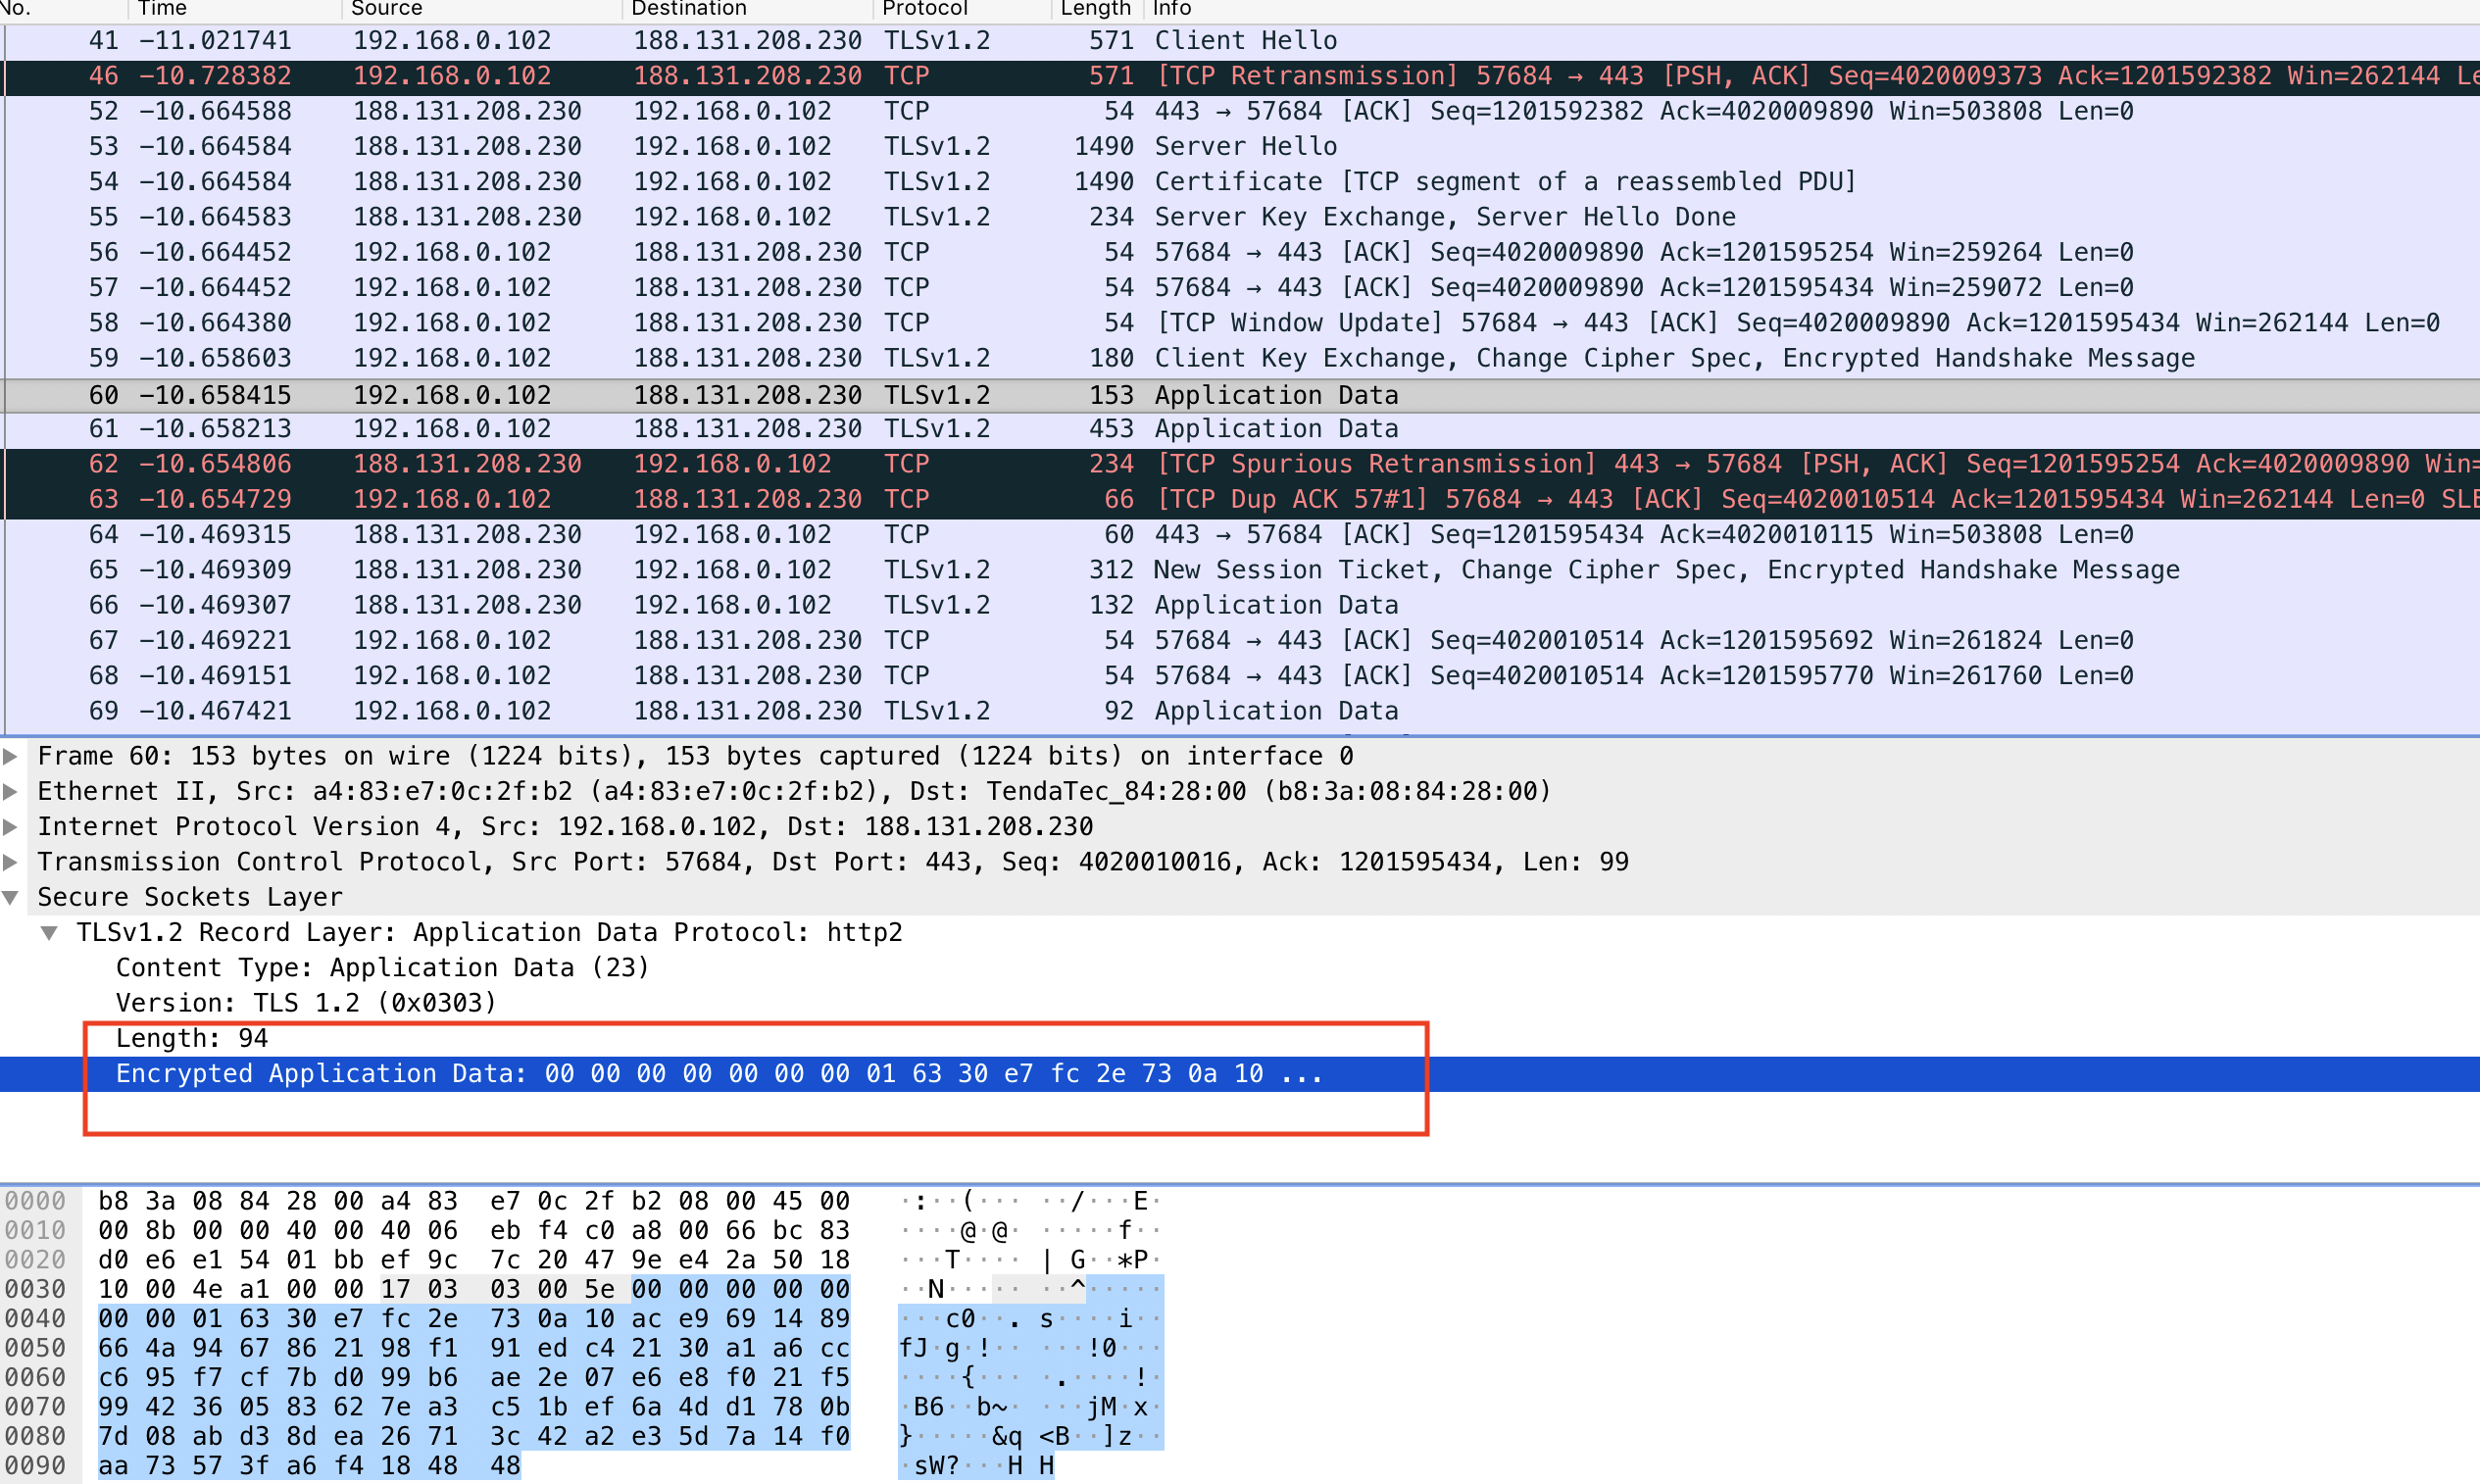 how to use wireshark with chrome